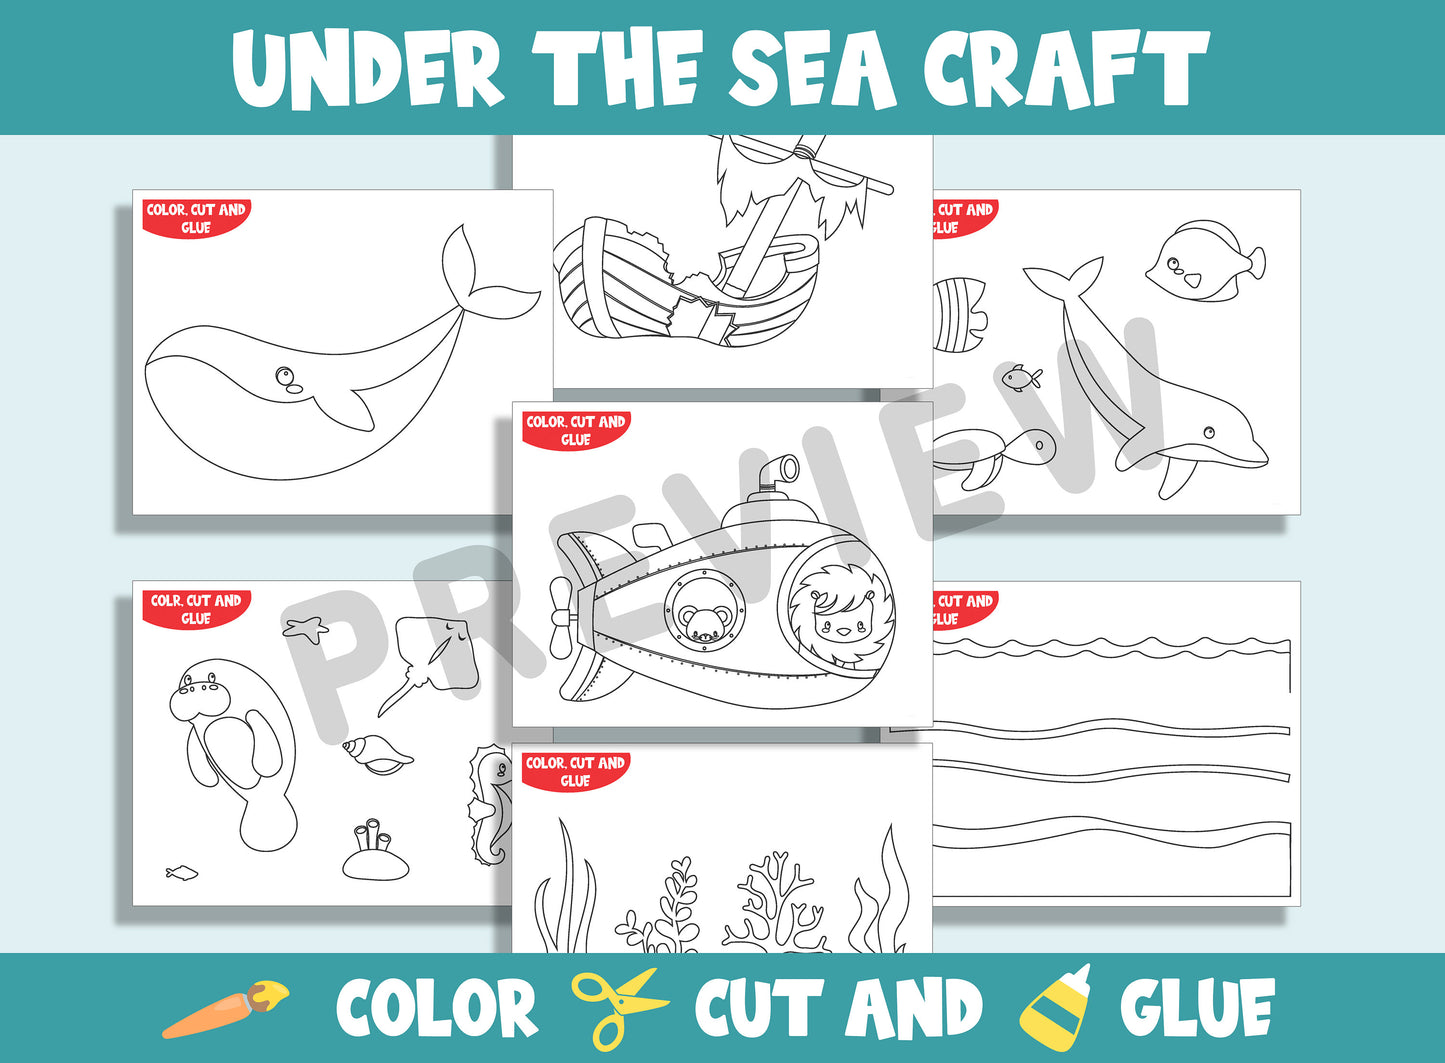 Under The Sea Crafts for Kids - Color, Cut, and Glue for PreK to 2nd Grade, 15 Pages, PDF File, Instant Download